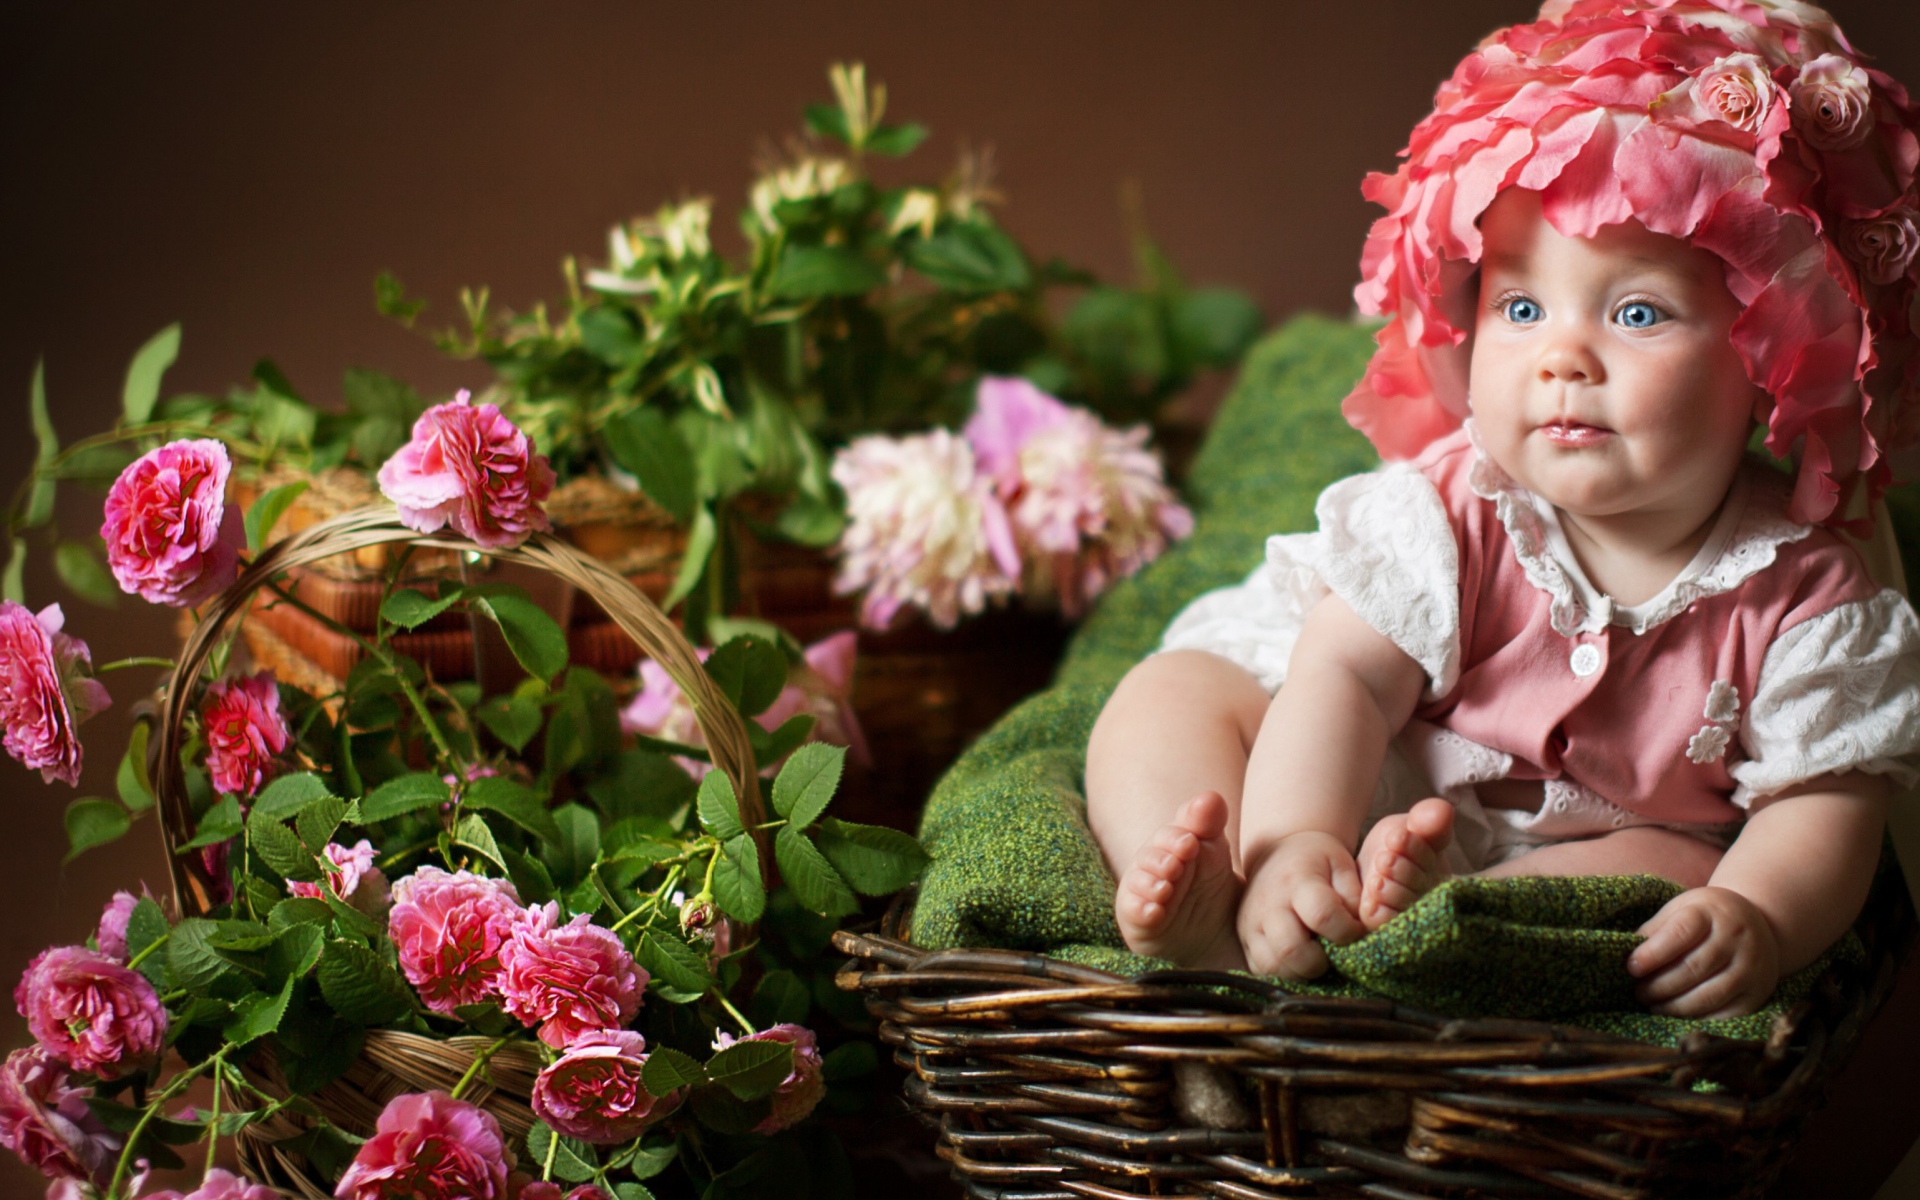 Cute Baby With Blue Eyes And Roses wallpaper 1920x1200